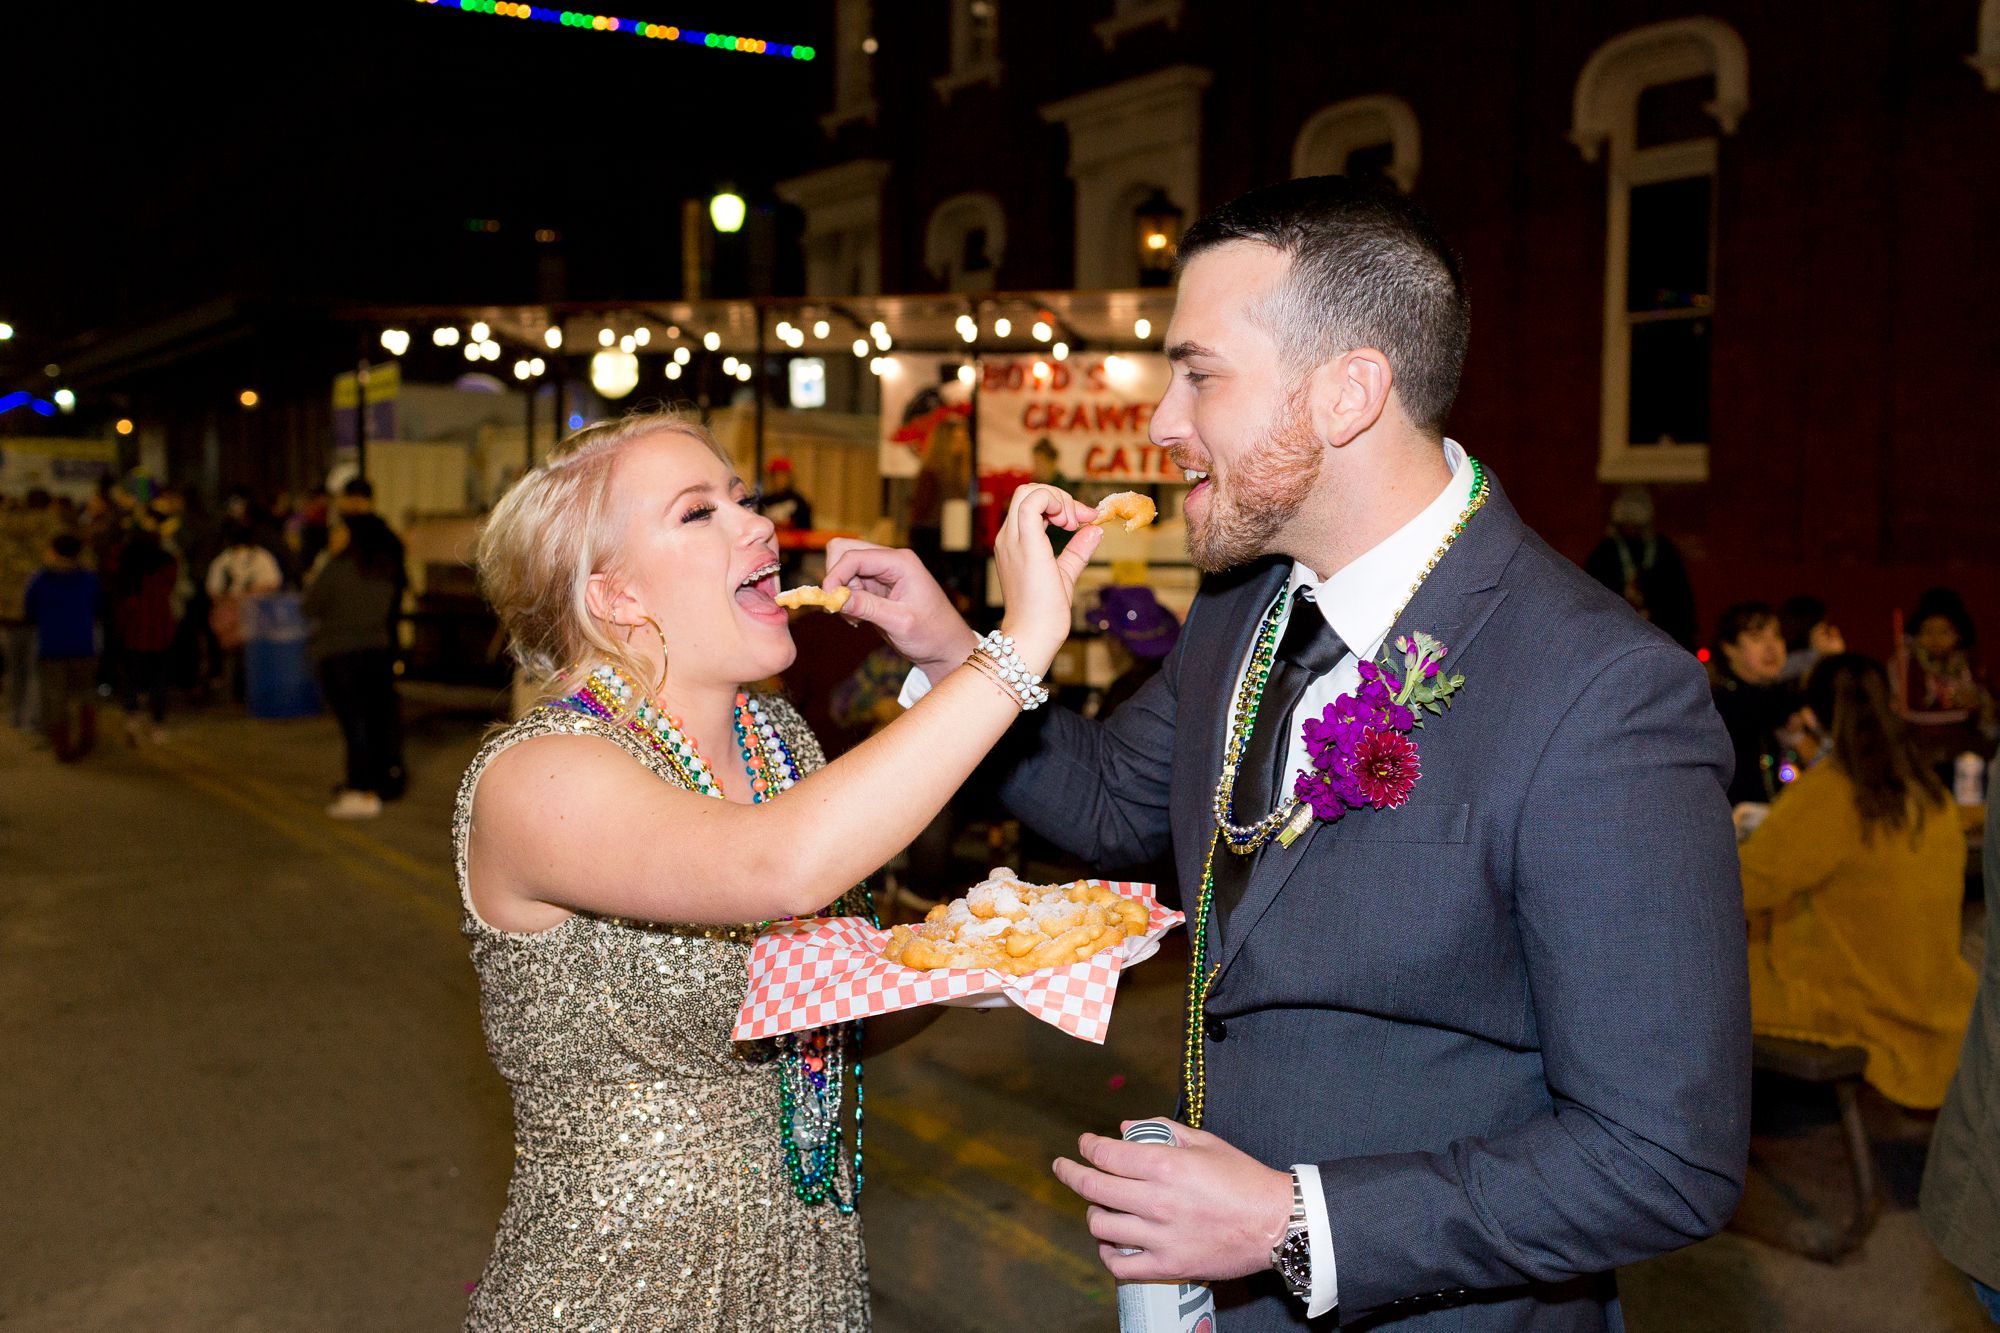 A bride and groom feed each other funnel cake at their Mardi Gras Galveston elopement.